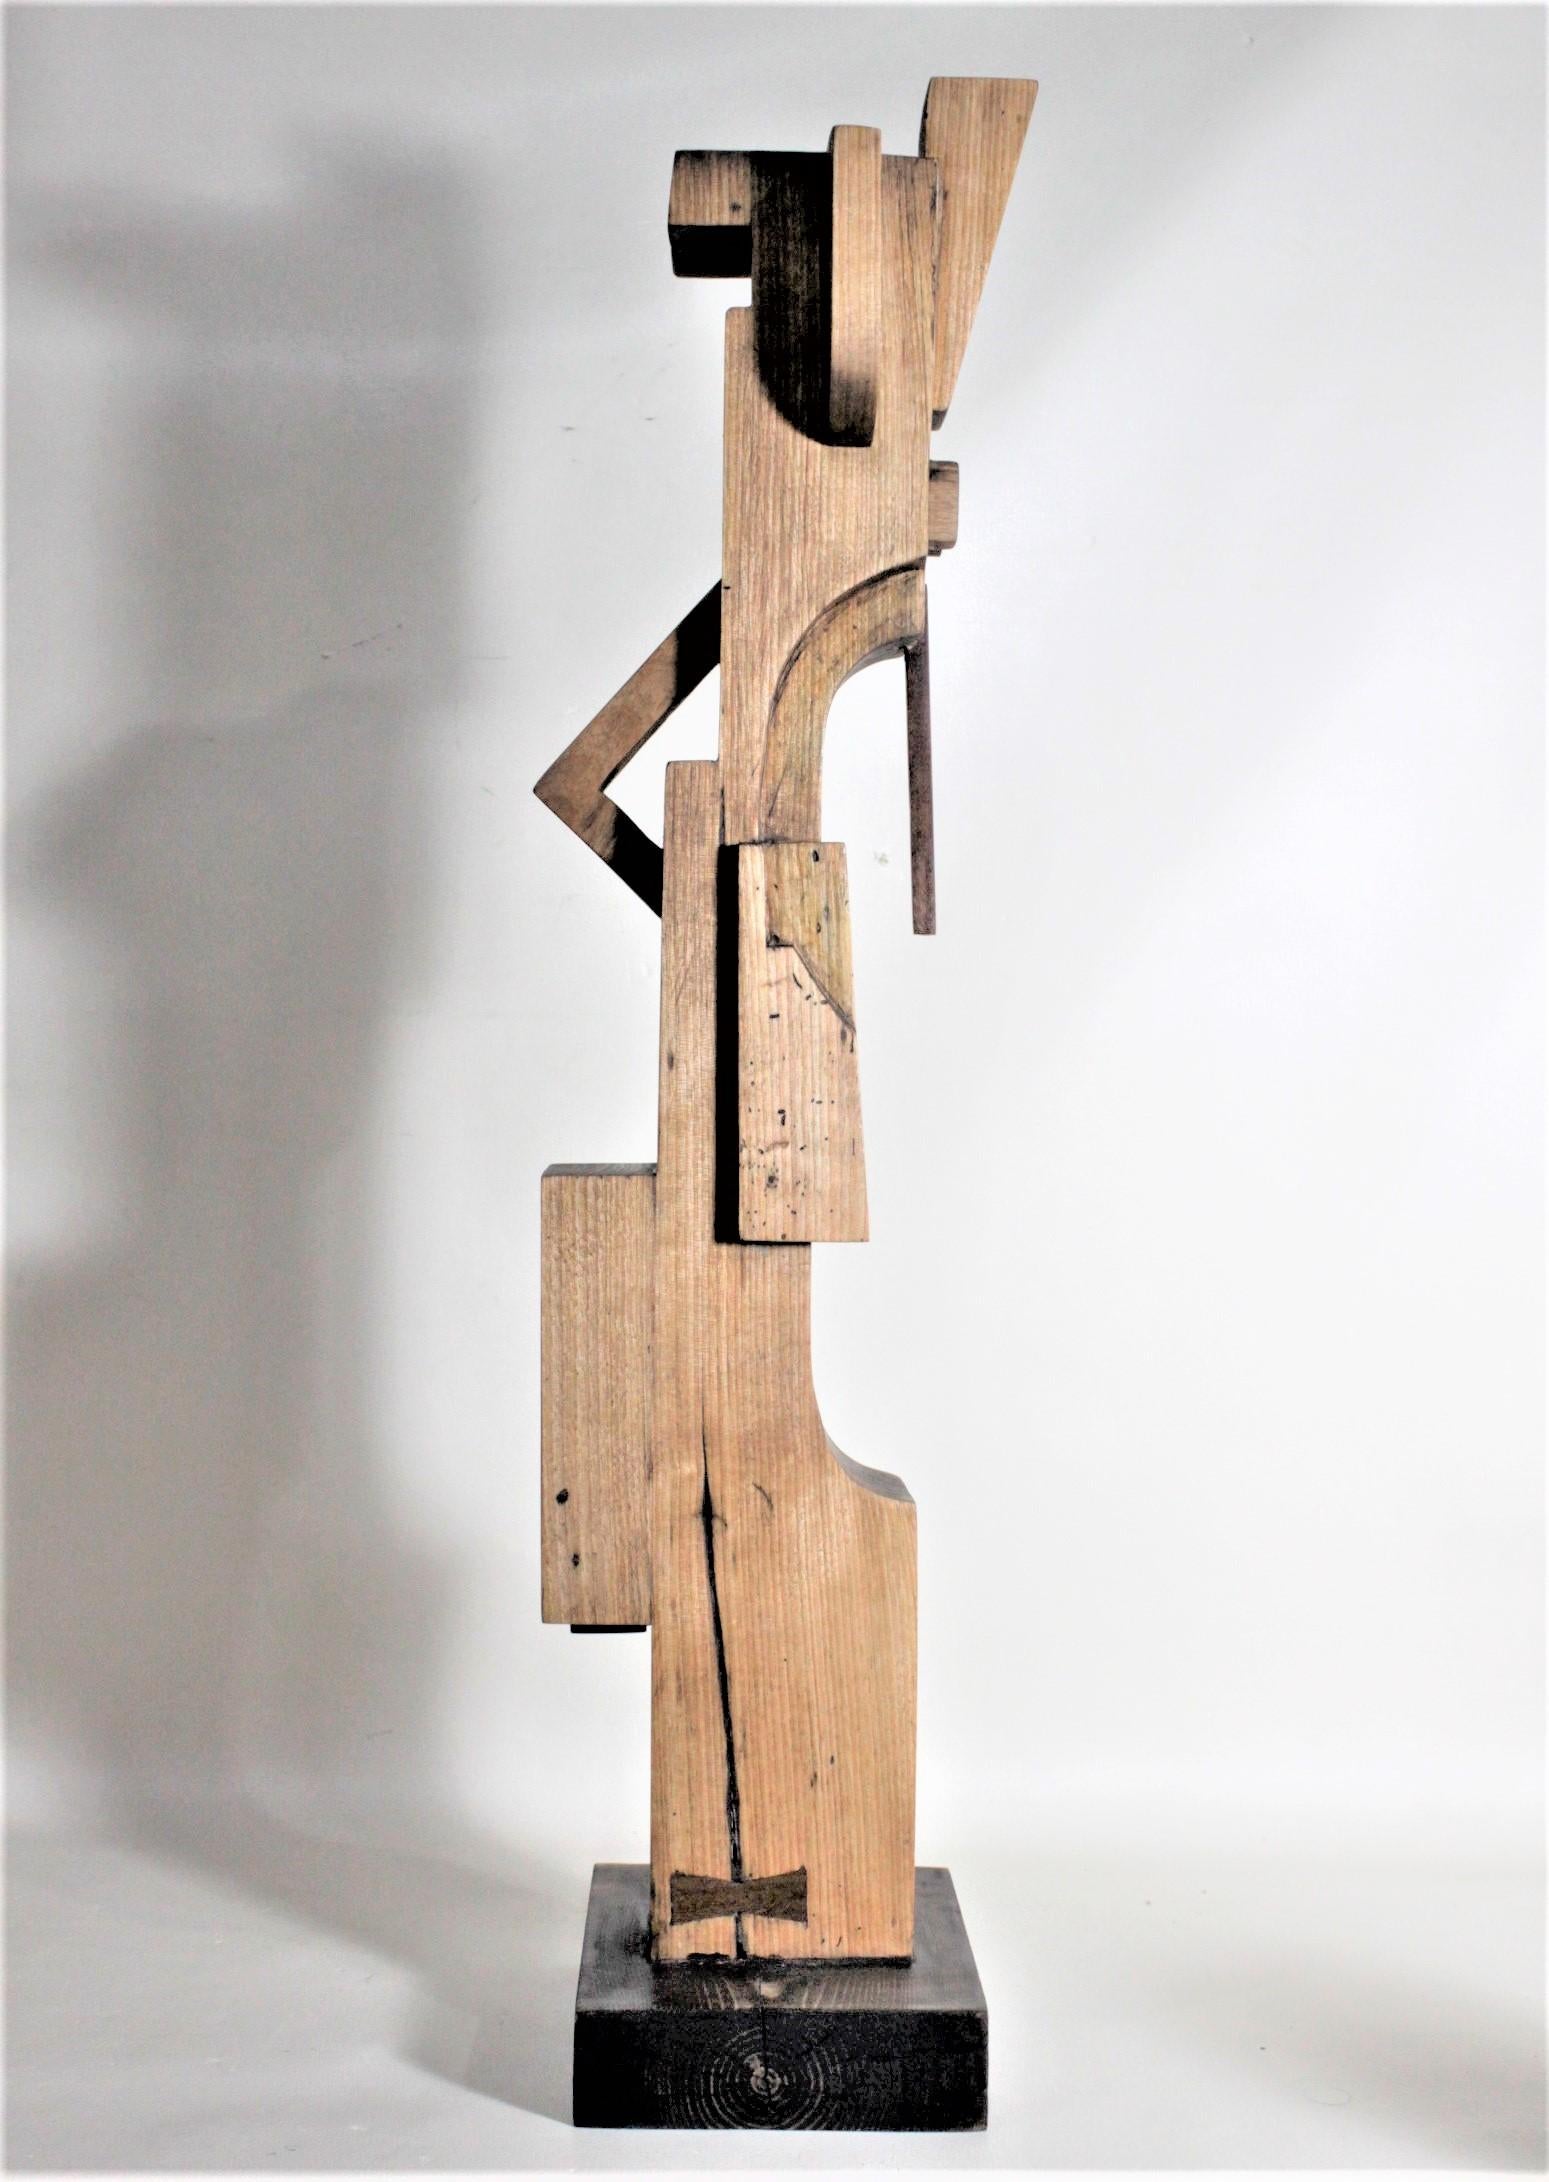 abstract wood sculpture artists